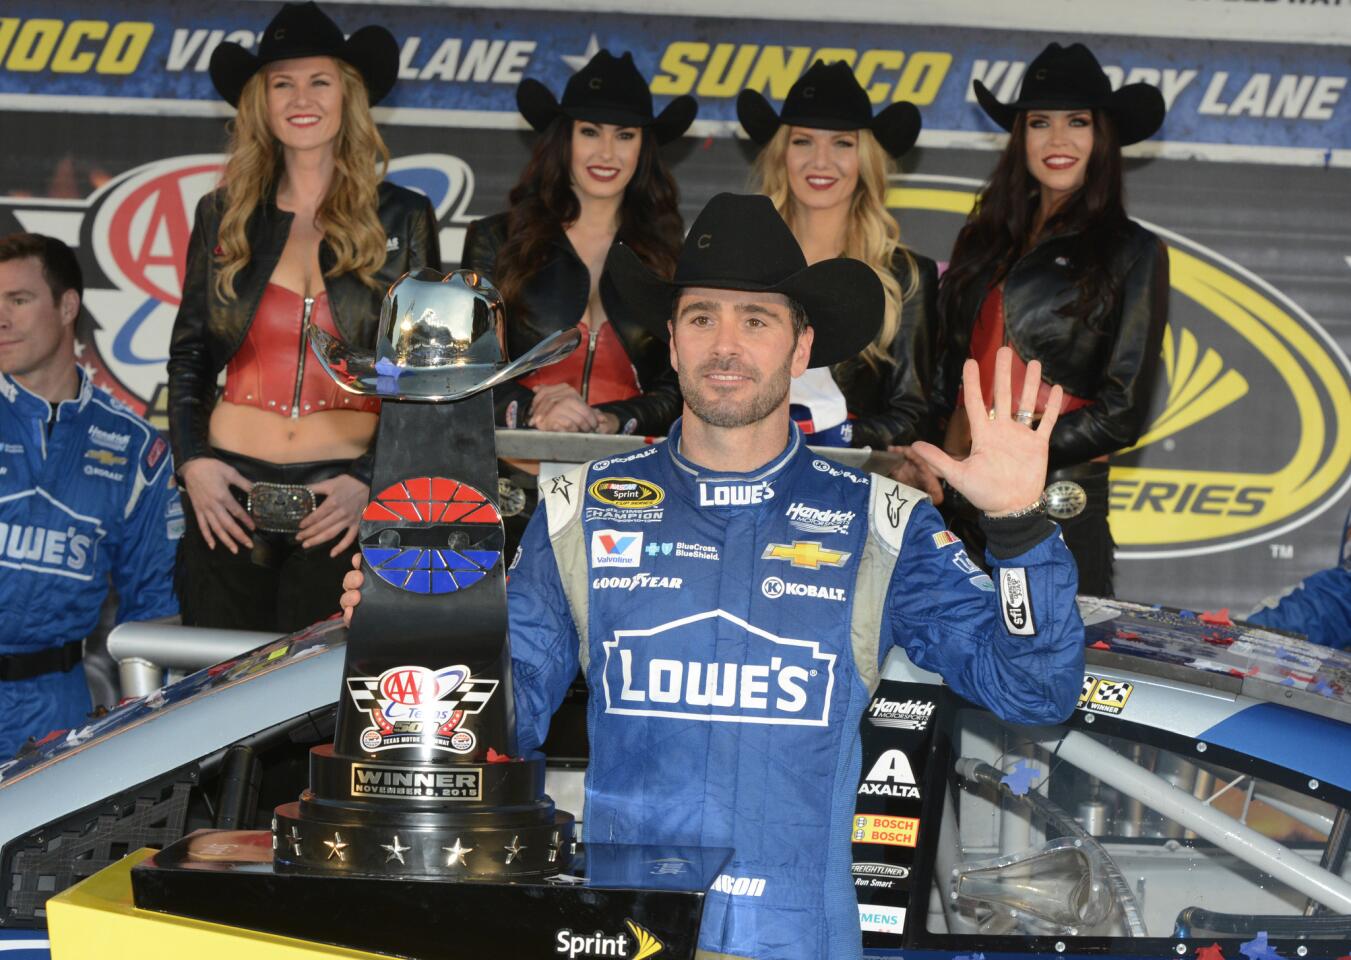 Texas Chase race No. 8: Jimmie Johnson